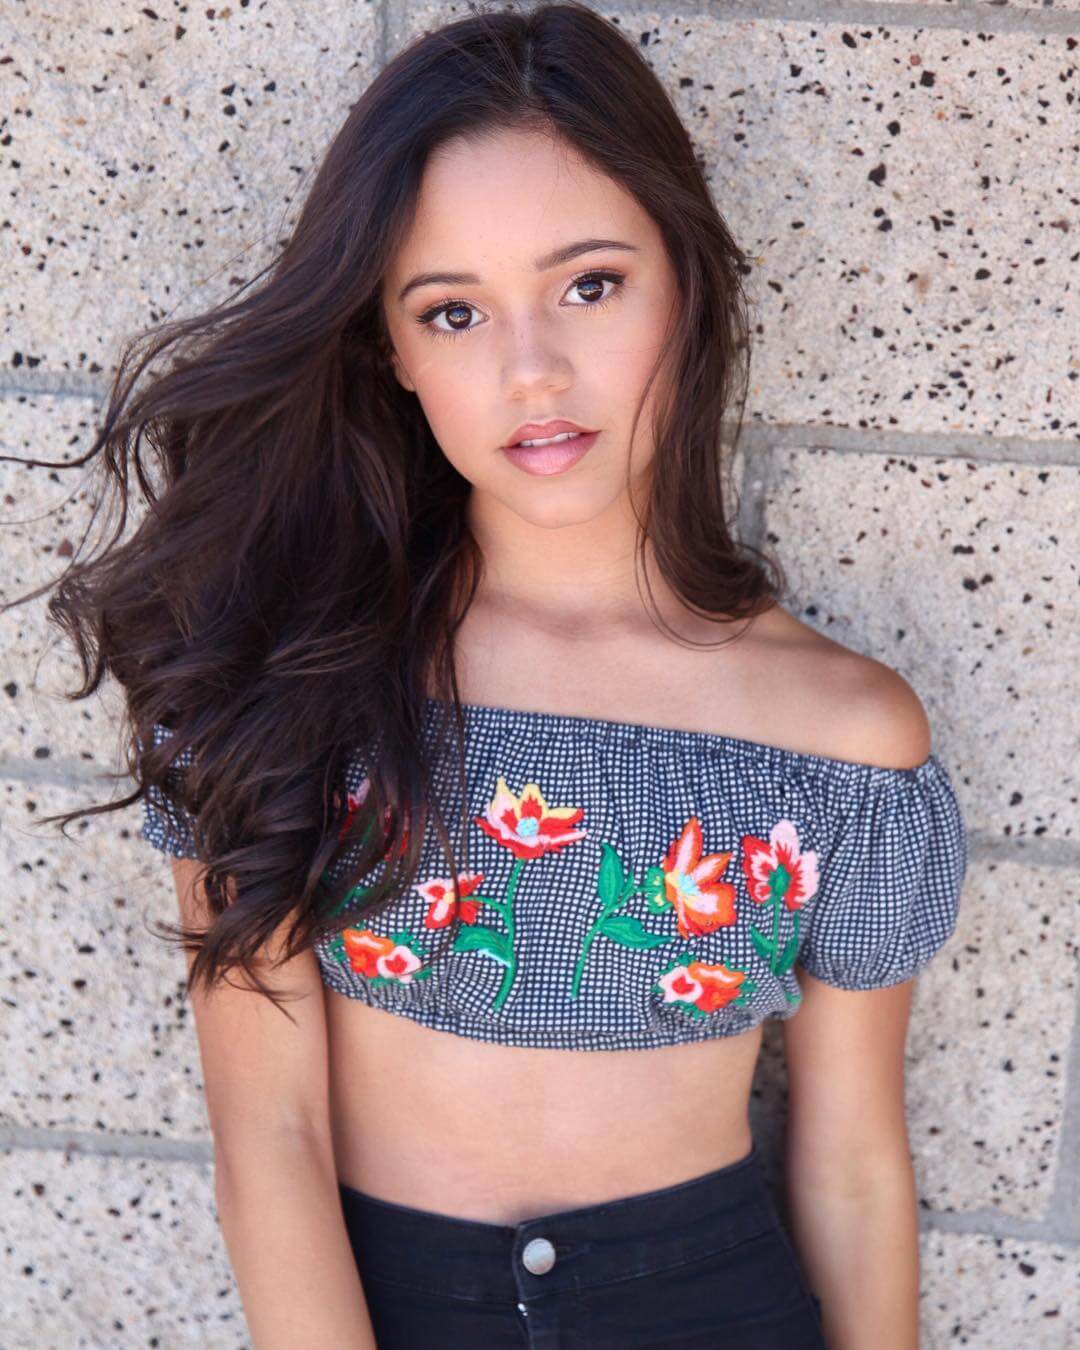 70+ Hot Pictures Of Jenna Ortega Nude Are Here To Take Your Breath Away 15....